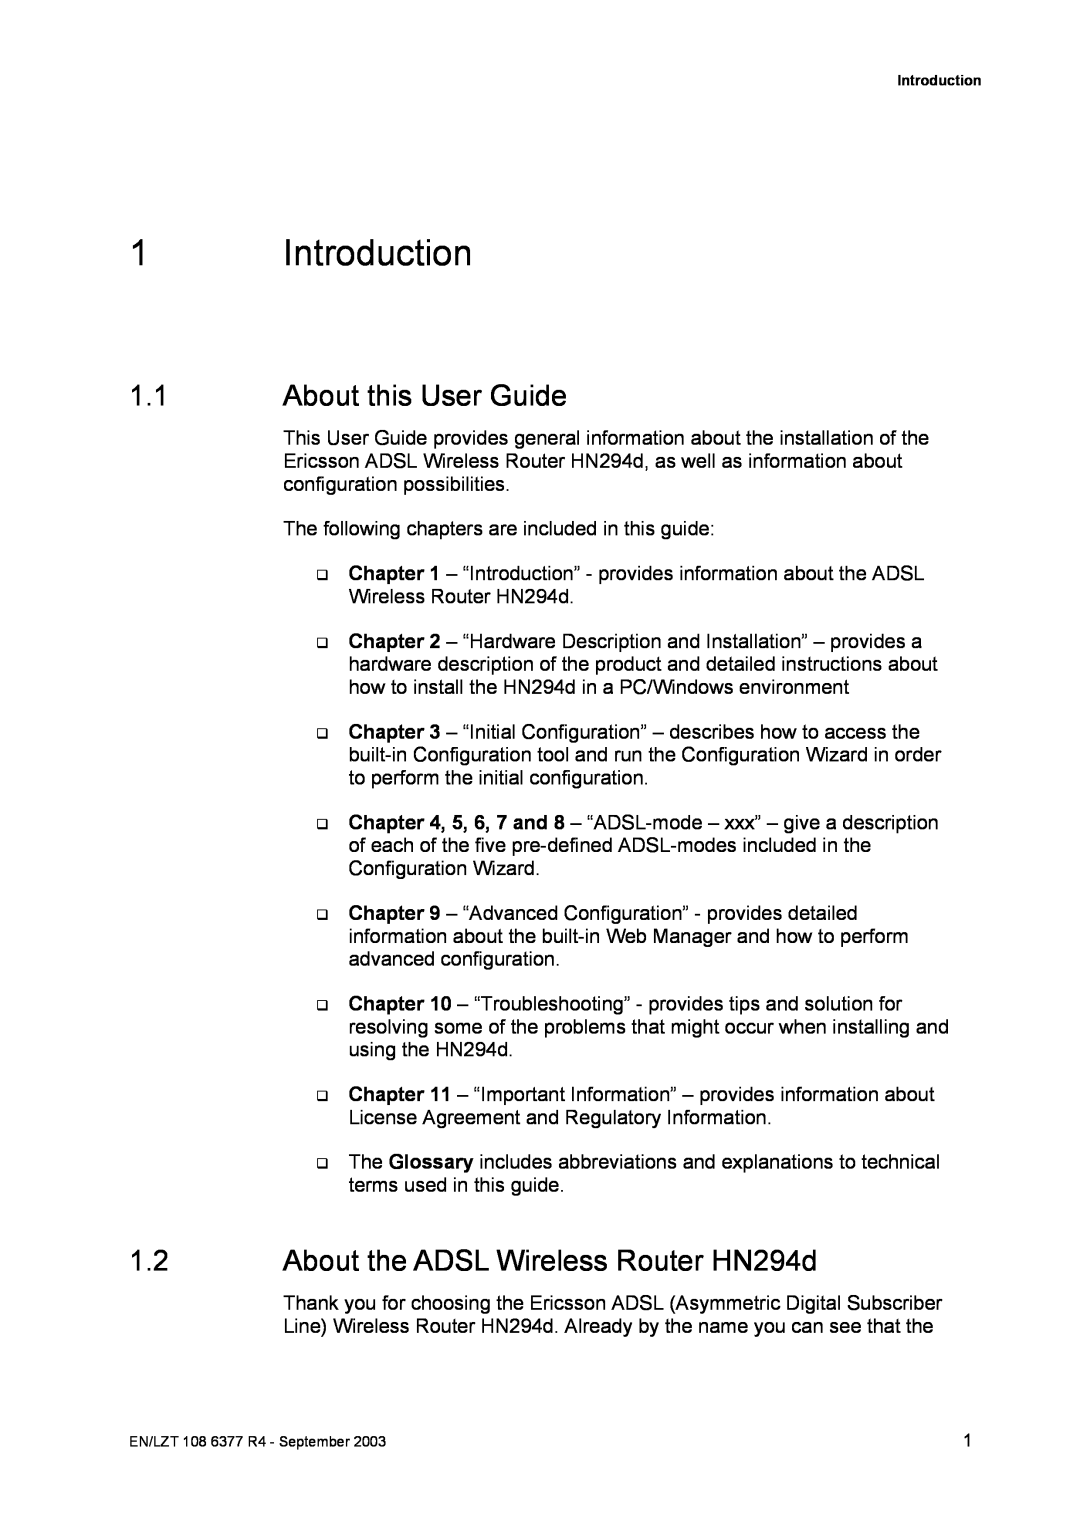 Garmin HN294DP/DI manual Introduction, About this User Guide, About the ADSL Wireless Router HN294d 